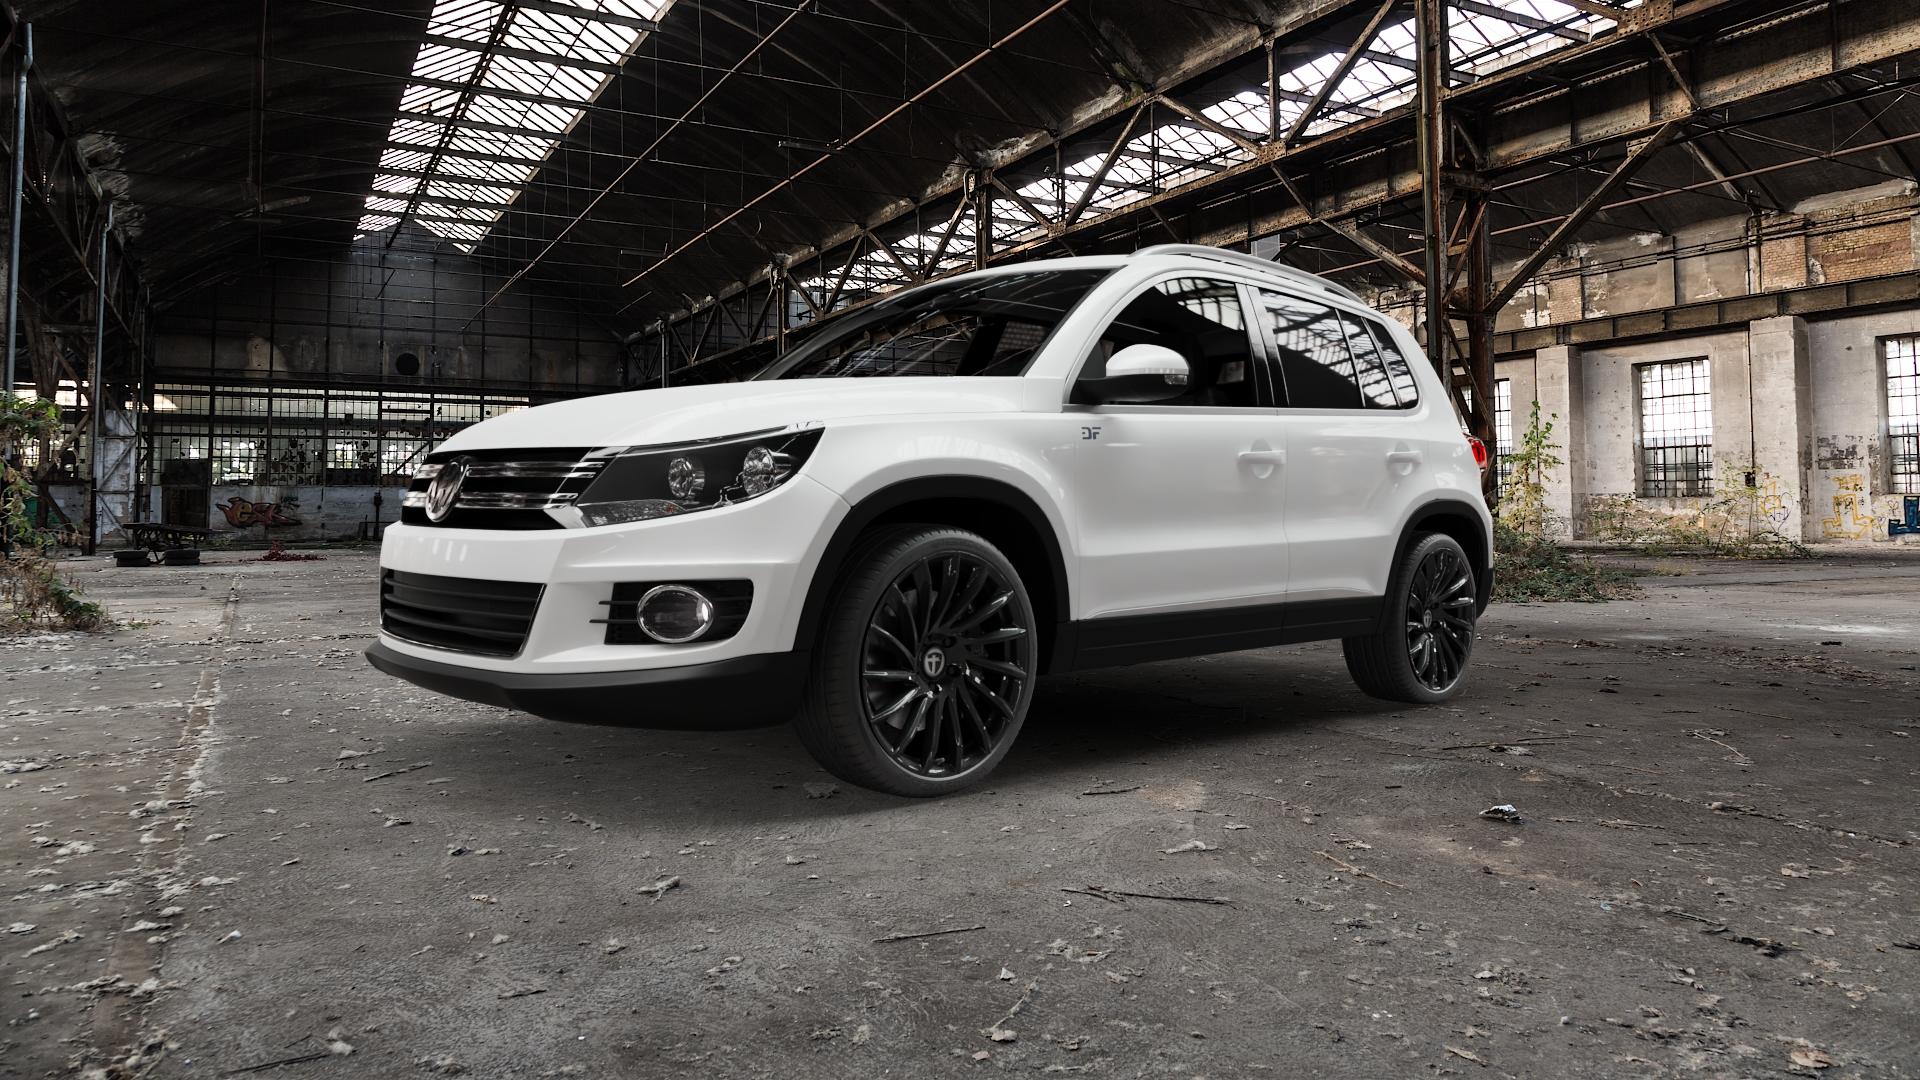 Volkswagen (VW) Tiguan I Type 5N 2,0l TSI 4Motion 155kW (211 hp) Wheels and  Tyre Packages